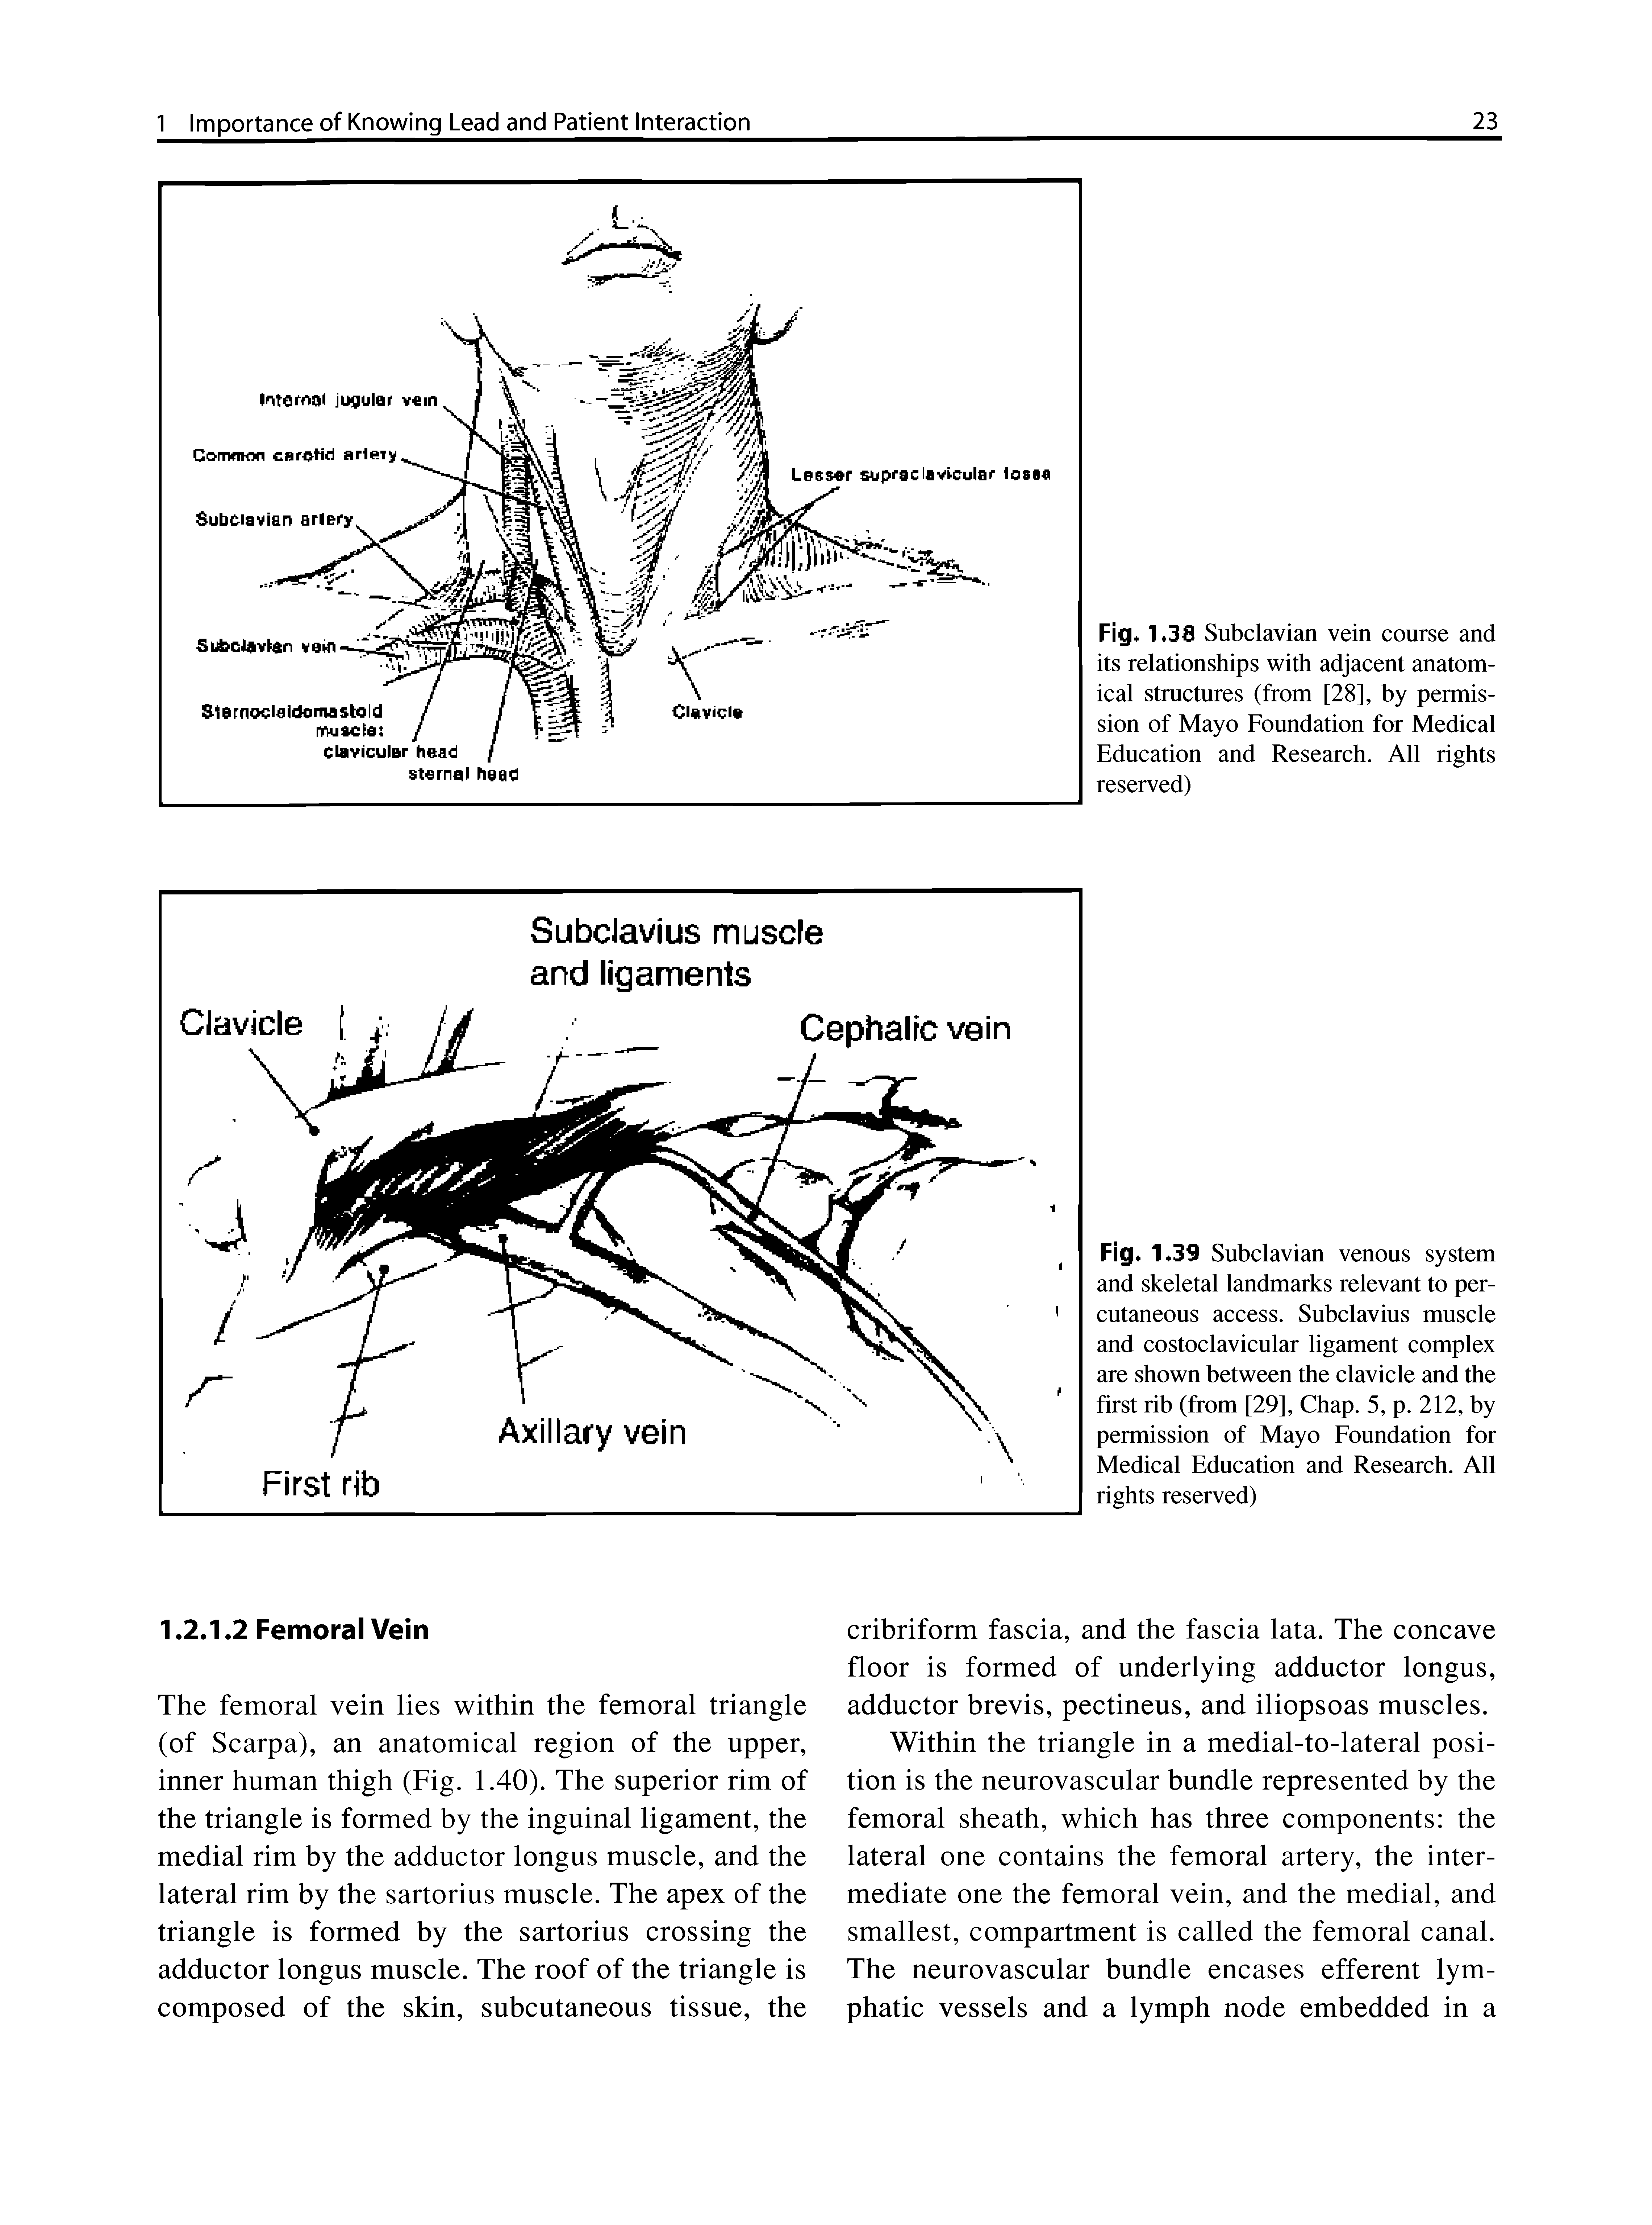 Fig.1. 39 Subclavian venous system and skeletal landmarks relevant to percutaneous access. Subclavius muscle and costoclavicular ligament complex are shown between the clavicle and the first rib (from [29], Chap. 5, p. 212, by permission of Mayo Foundation for Medical Education and Research. All rights reserved)...